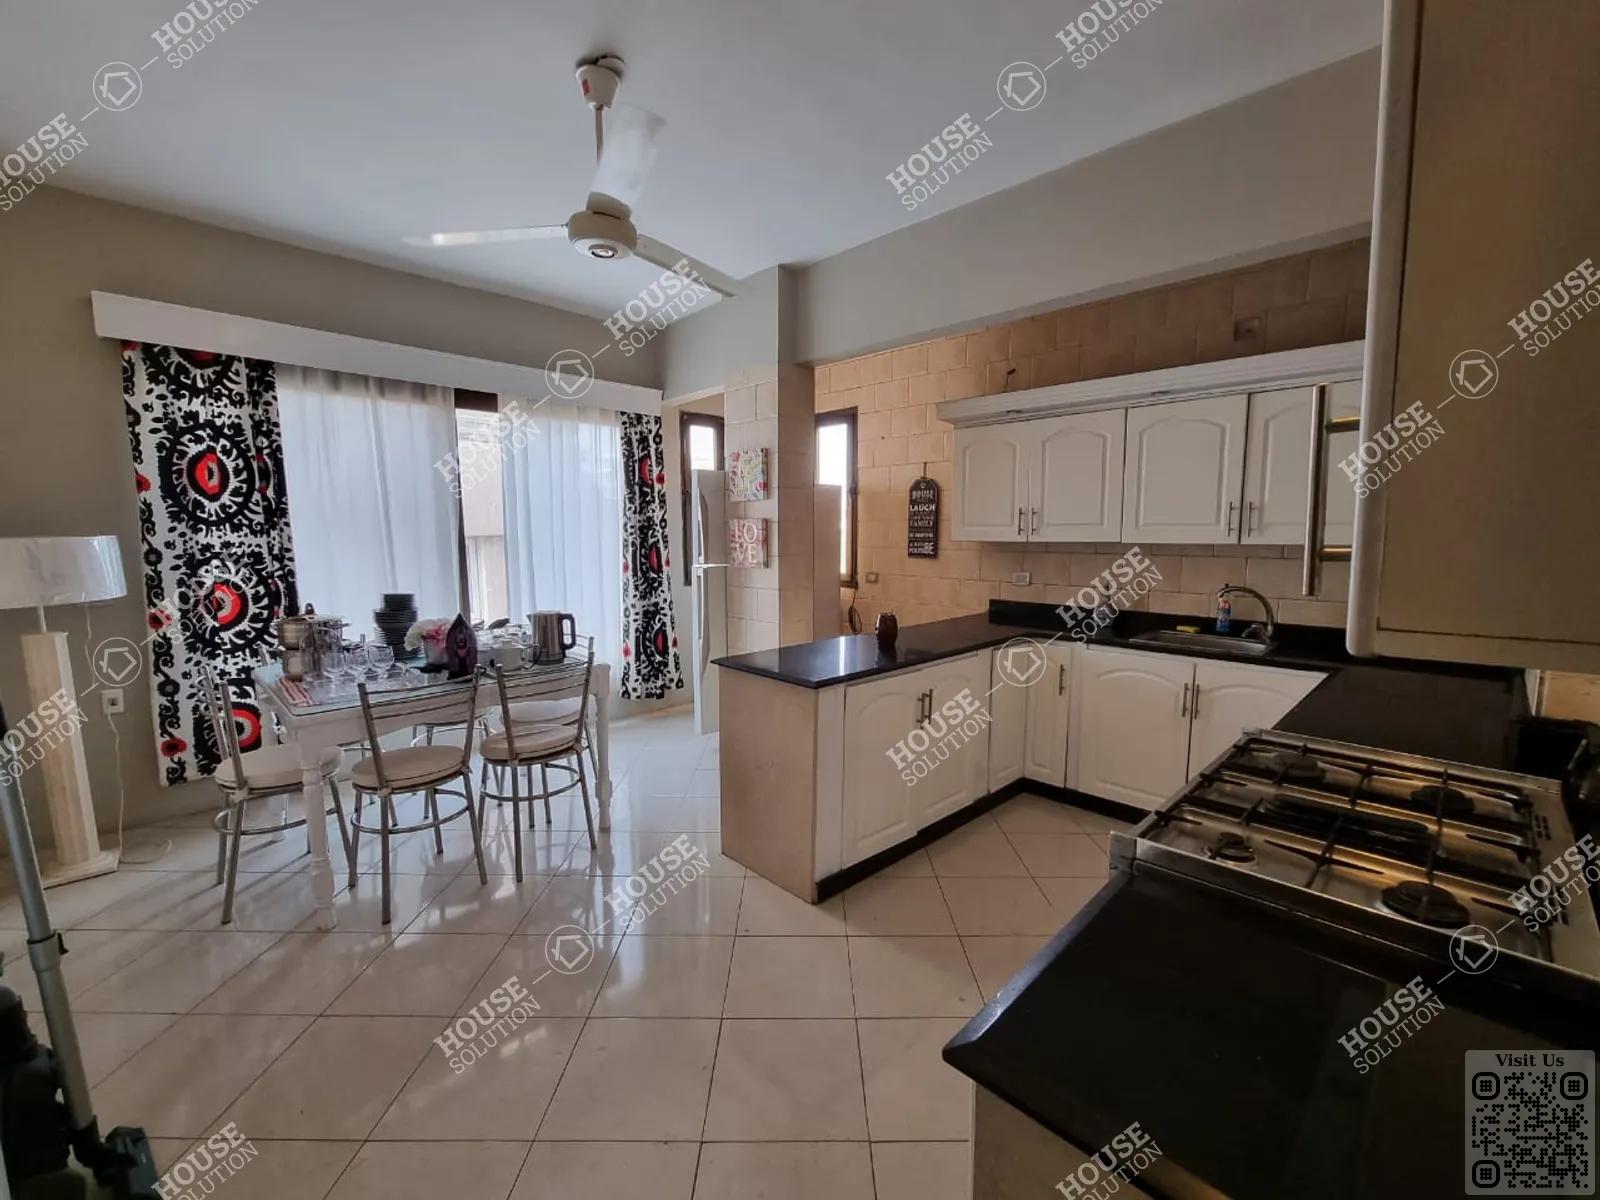 KITCHEN  @ Apartments For Rent In Maadi Maadi Degla Area: 300 m² consists of 4 Bedrooms 3 Bathrooms Modern furnished 5 stars #4803-0